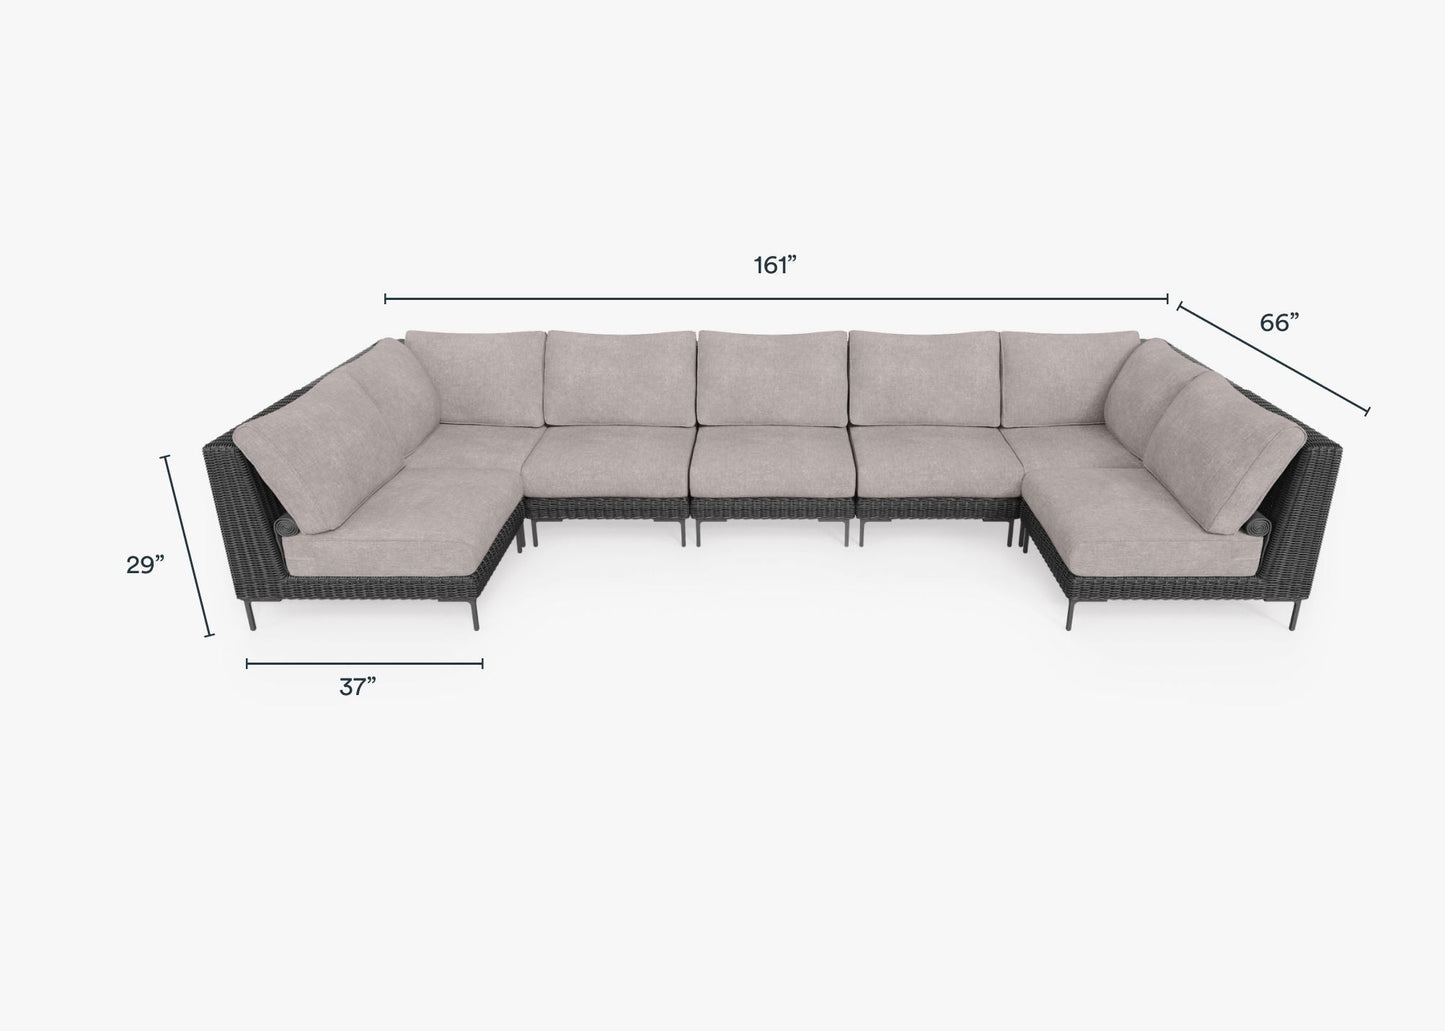 Live Outer 161" x 66" Black Wicker Outdoor U Sectional 7-Seat With Sandstone Gray Cushion